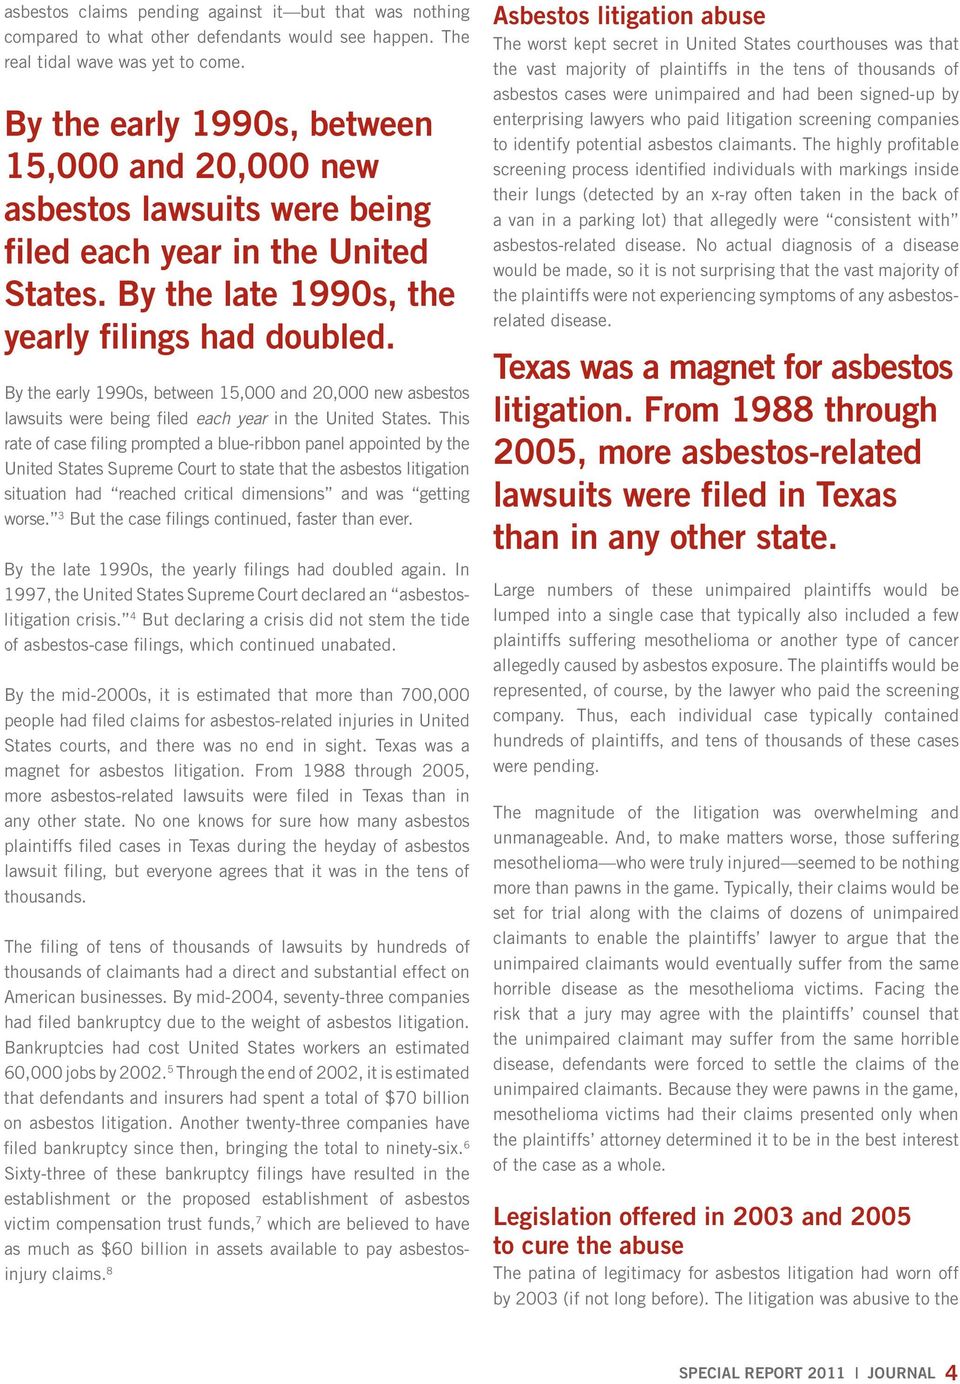 By the early 1990s, between 15,000 and 20,000 new asbestos lawsuits were being filed each year in the United States.